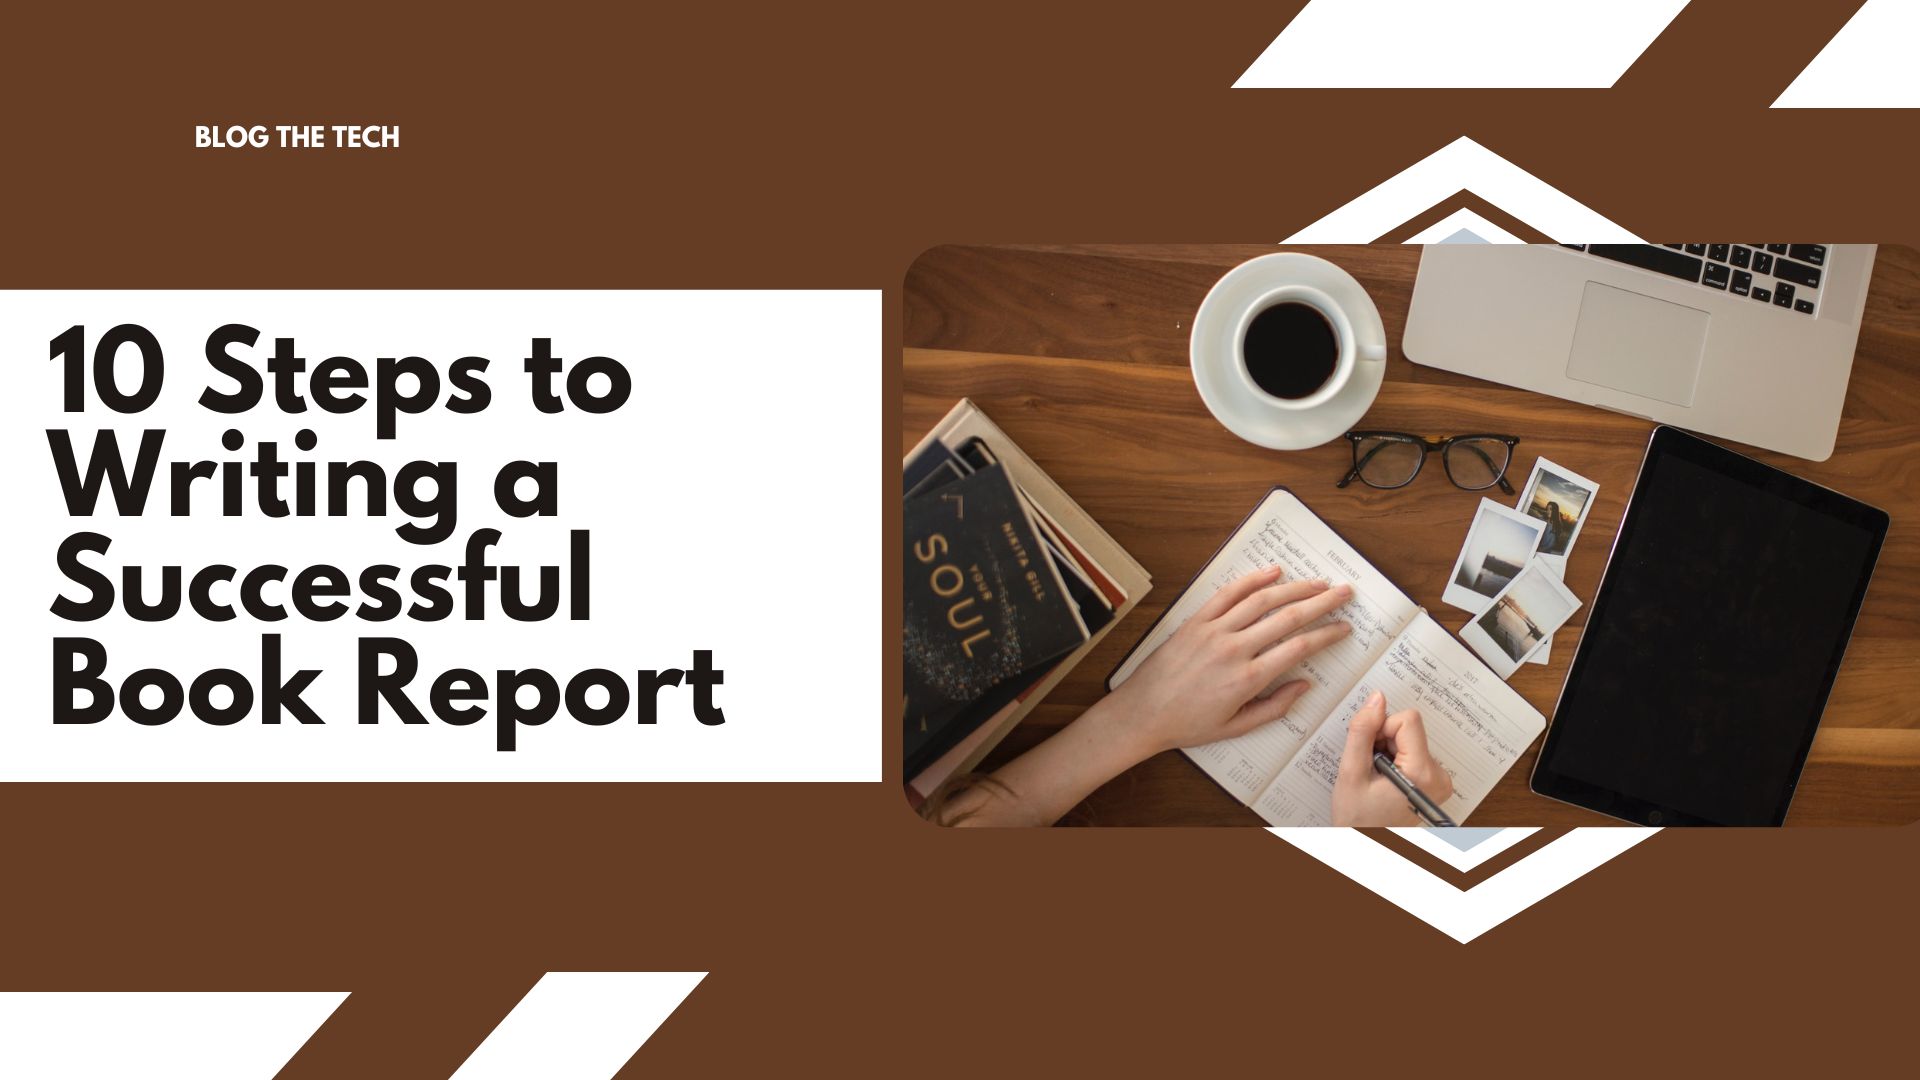 10 Steps to Writing a Successful Book Report